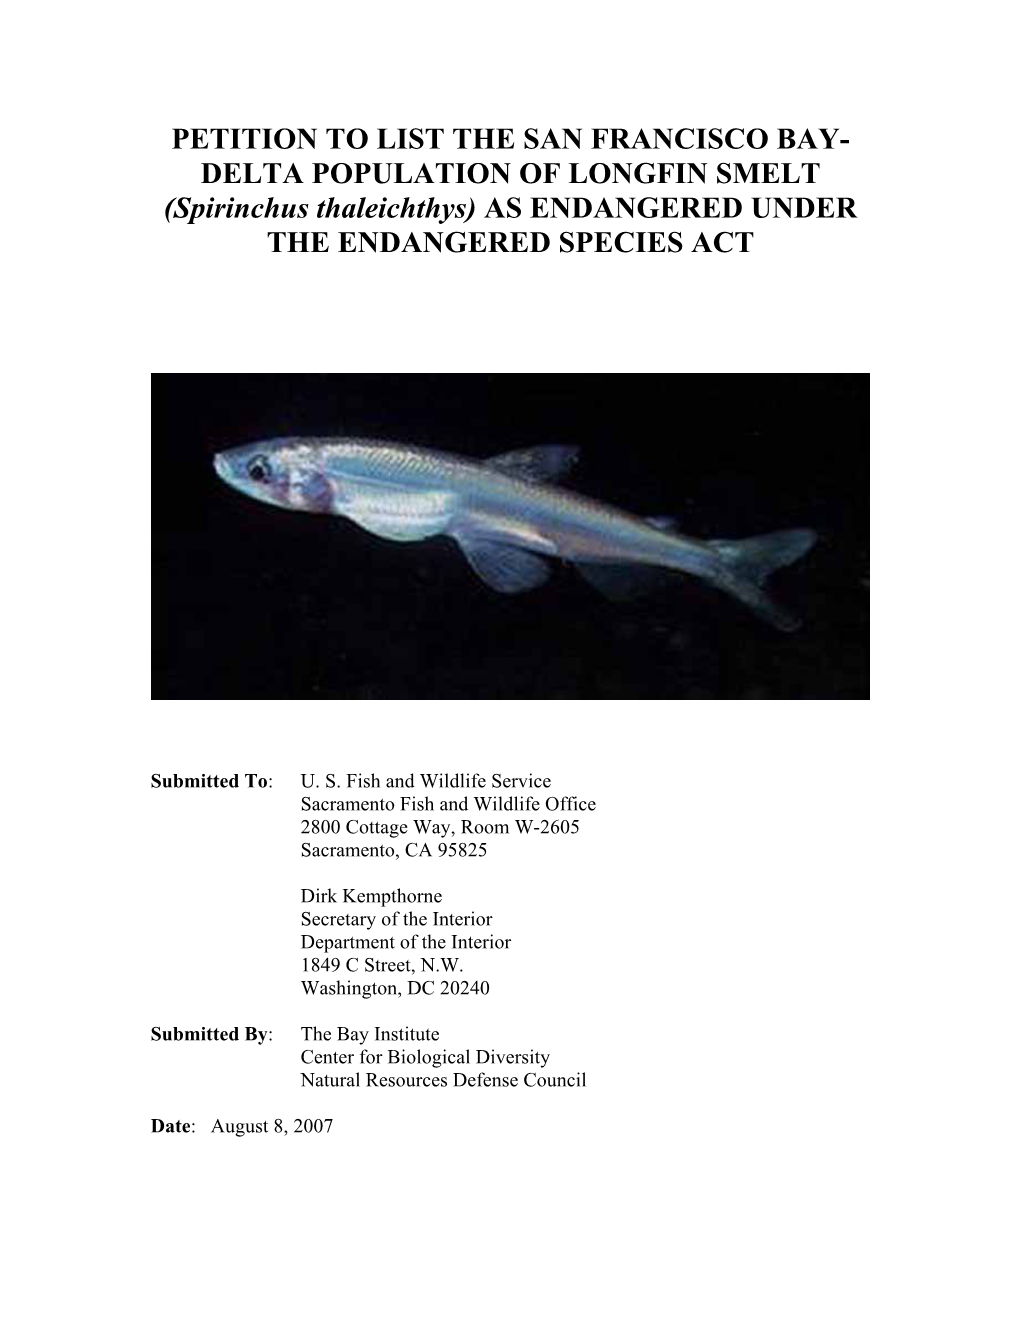 PETITION to LIST the SAN FRANCISCO BAY- DELTA POPULATION of LONGFIN SMELT (Spirinchus Thaleichthys) AS ENDANGERED UNDER the ENDANGERED SPECIES ACT